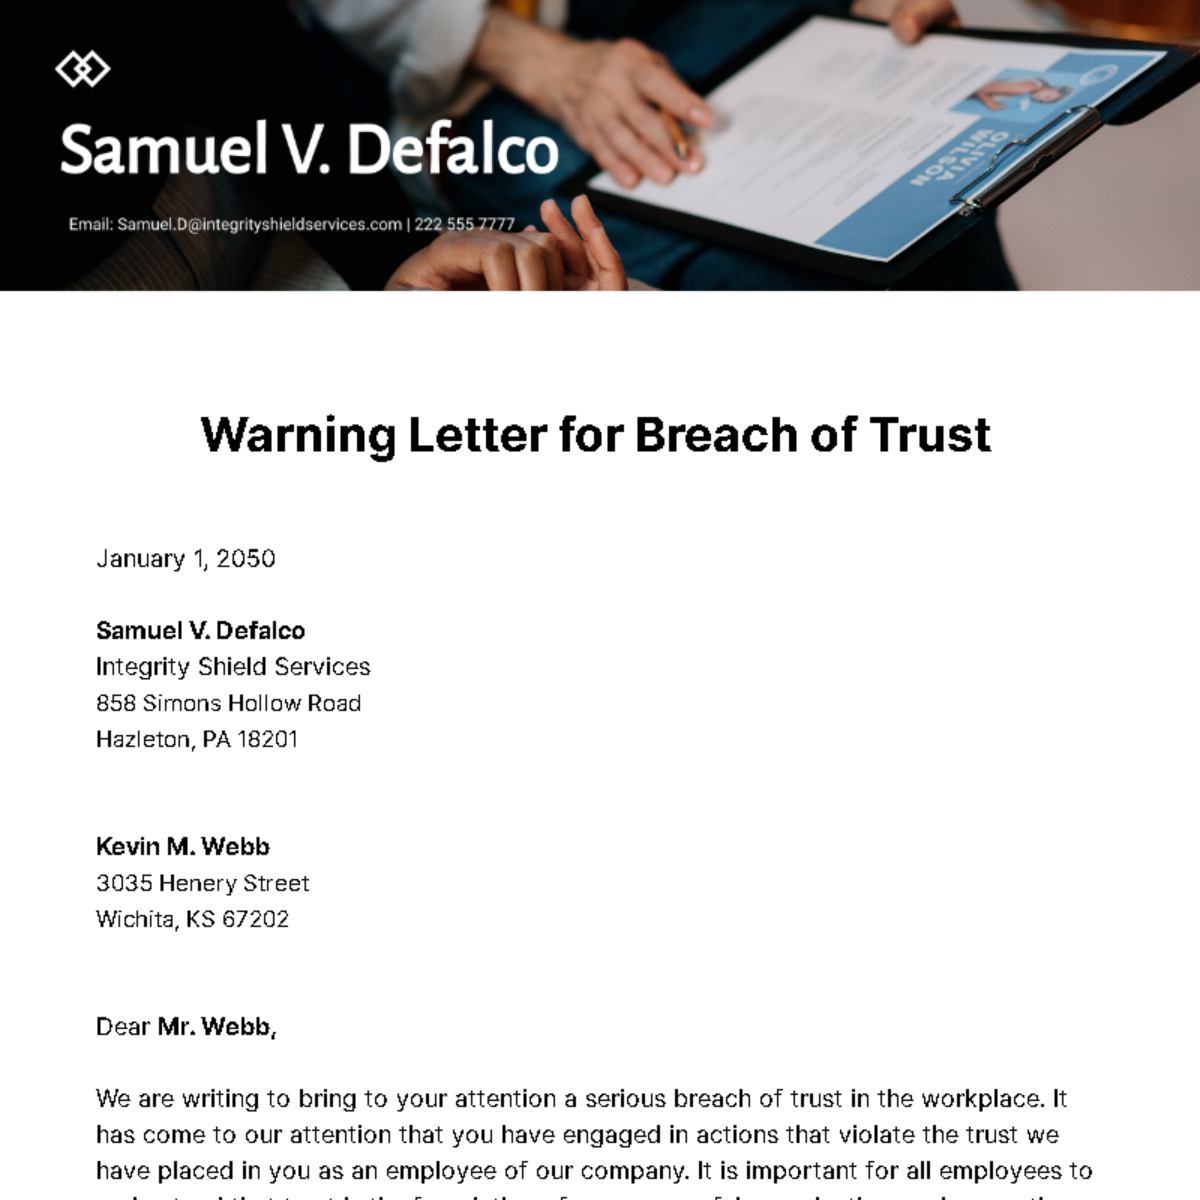 Warning Letter for Breach of Trust Template